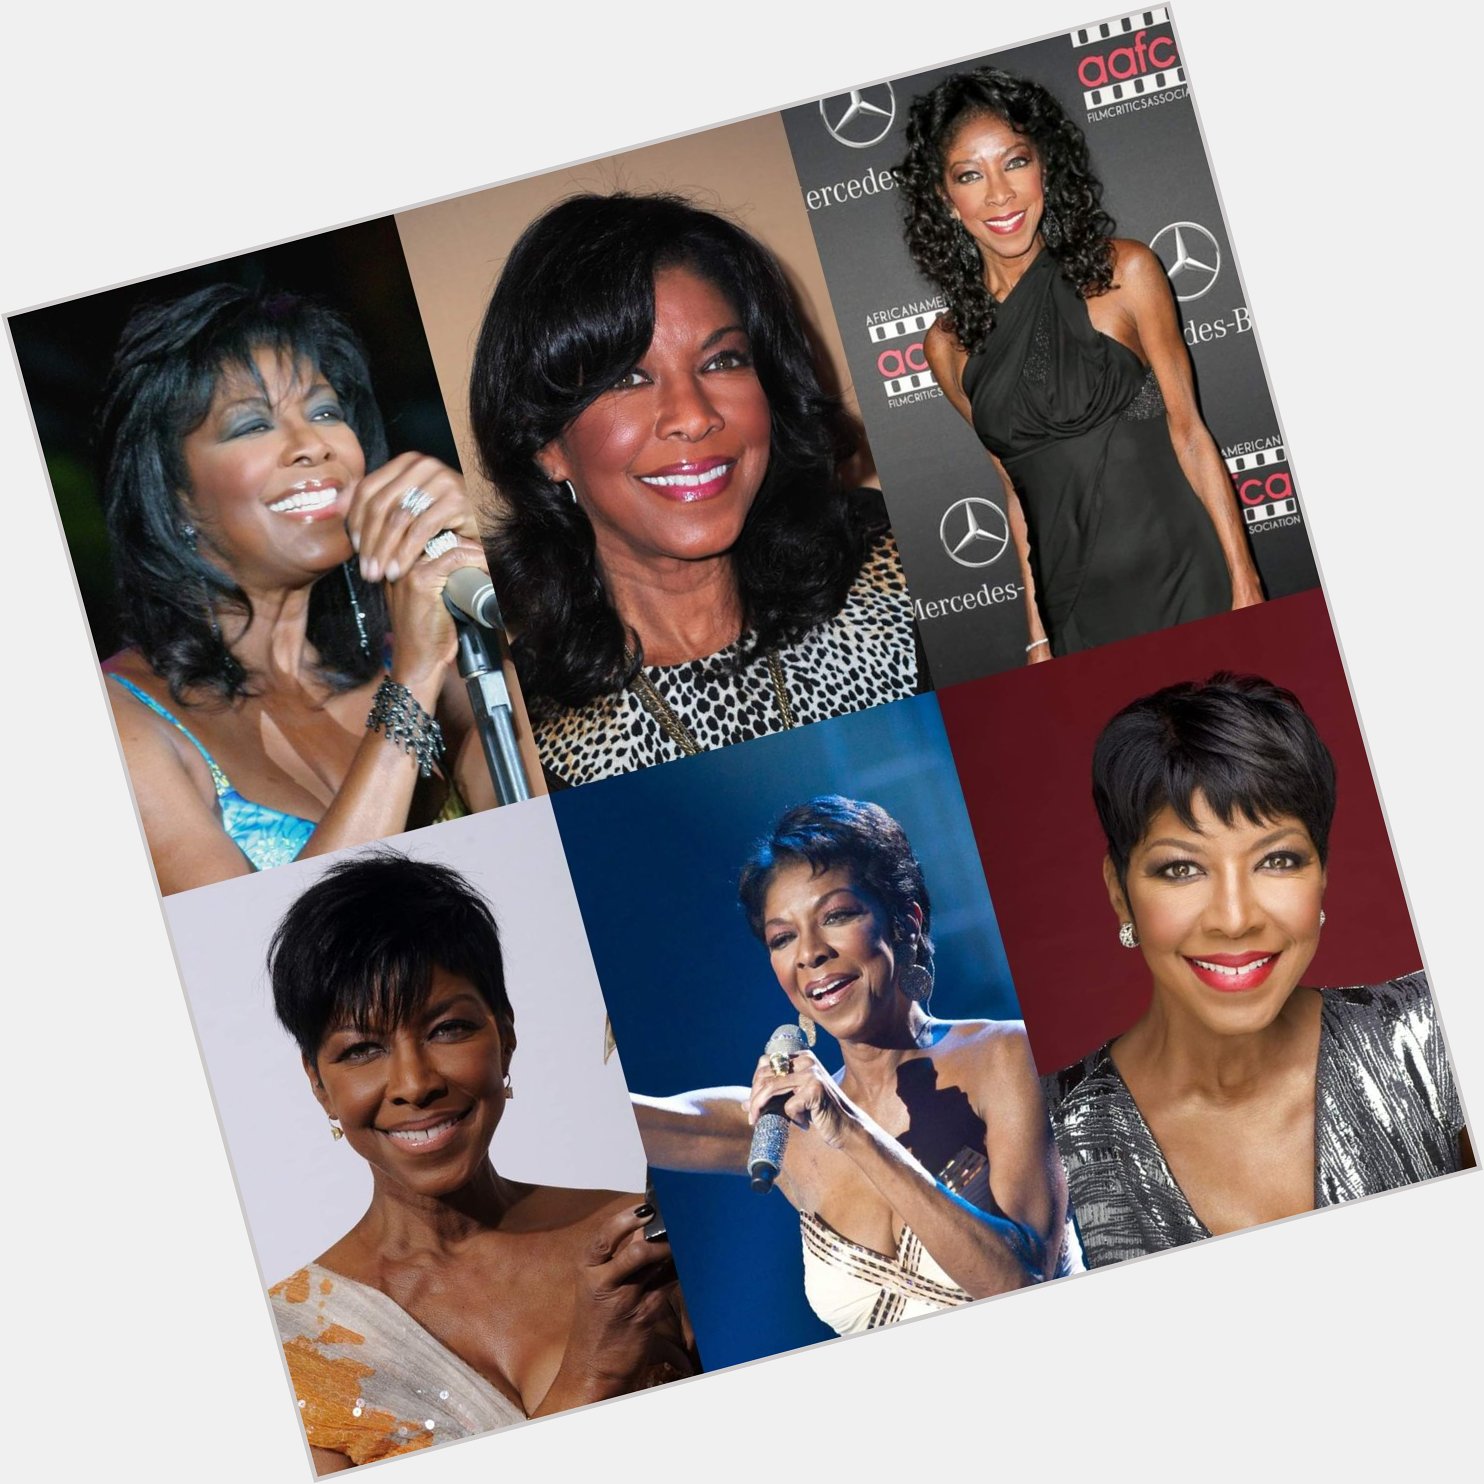 HAPPY 73RD BIRTHDAY NATALIE COLE. REST IN HEAVEN. 